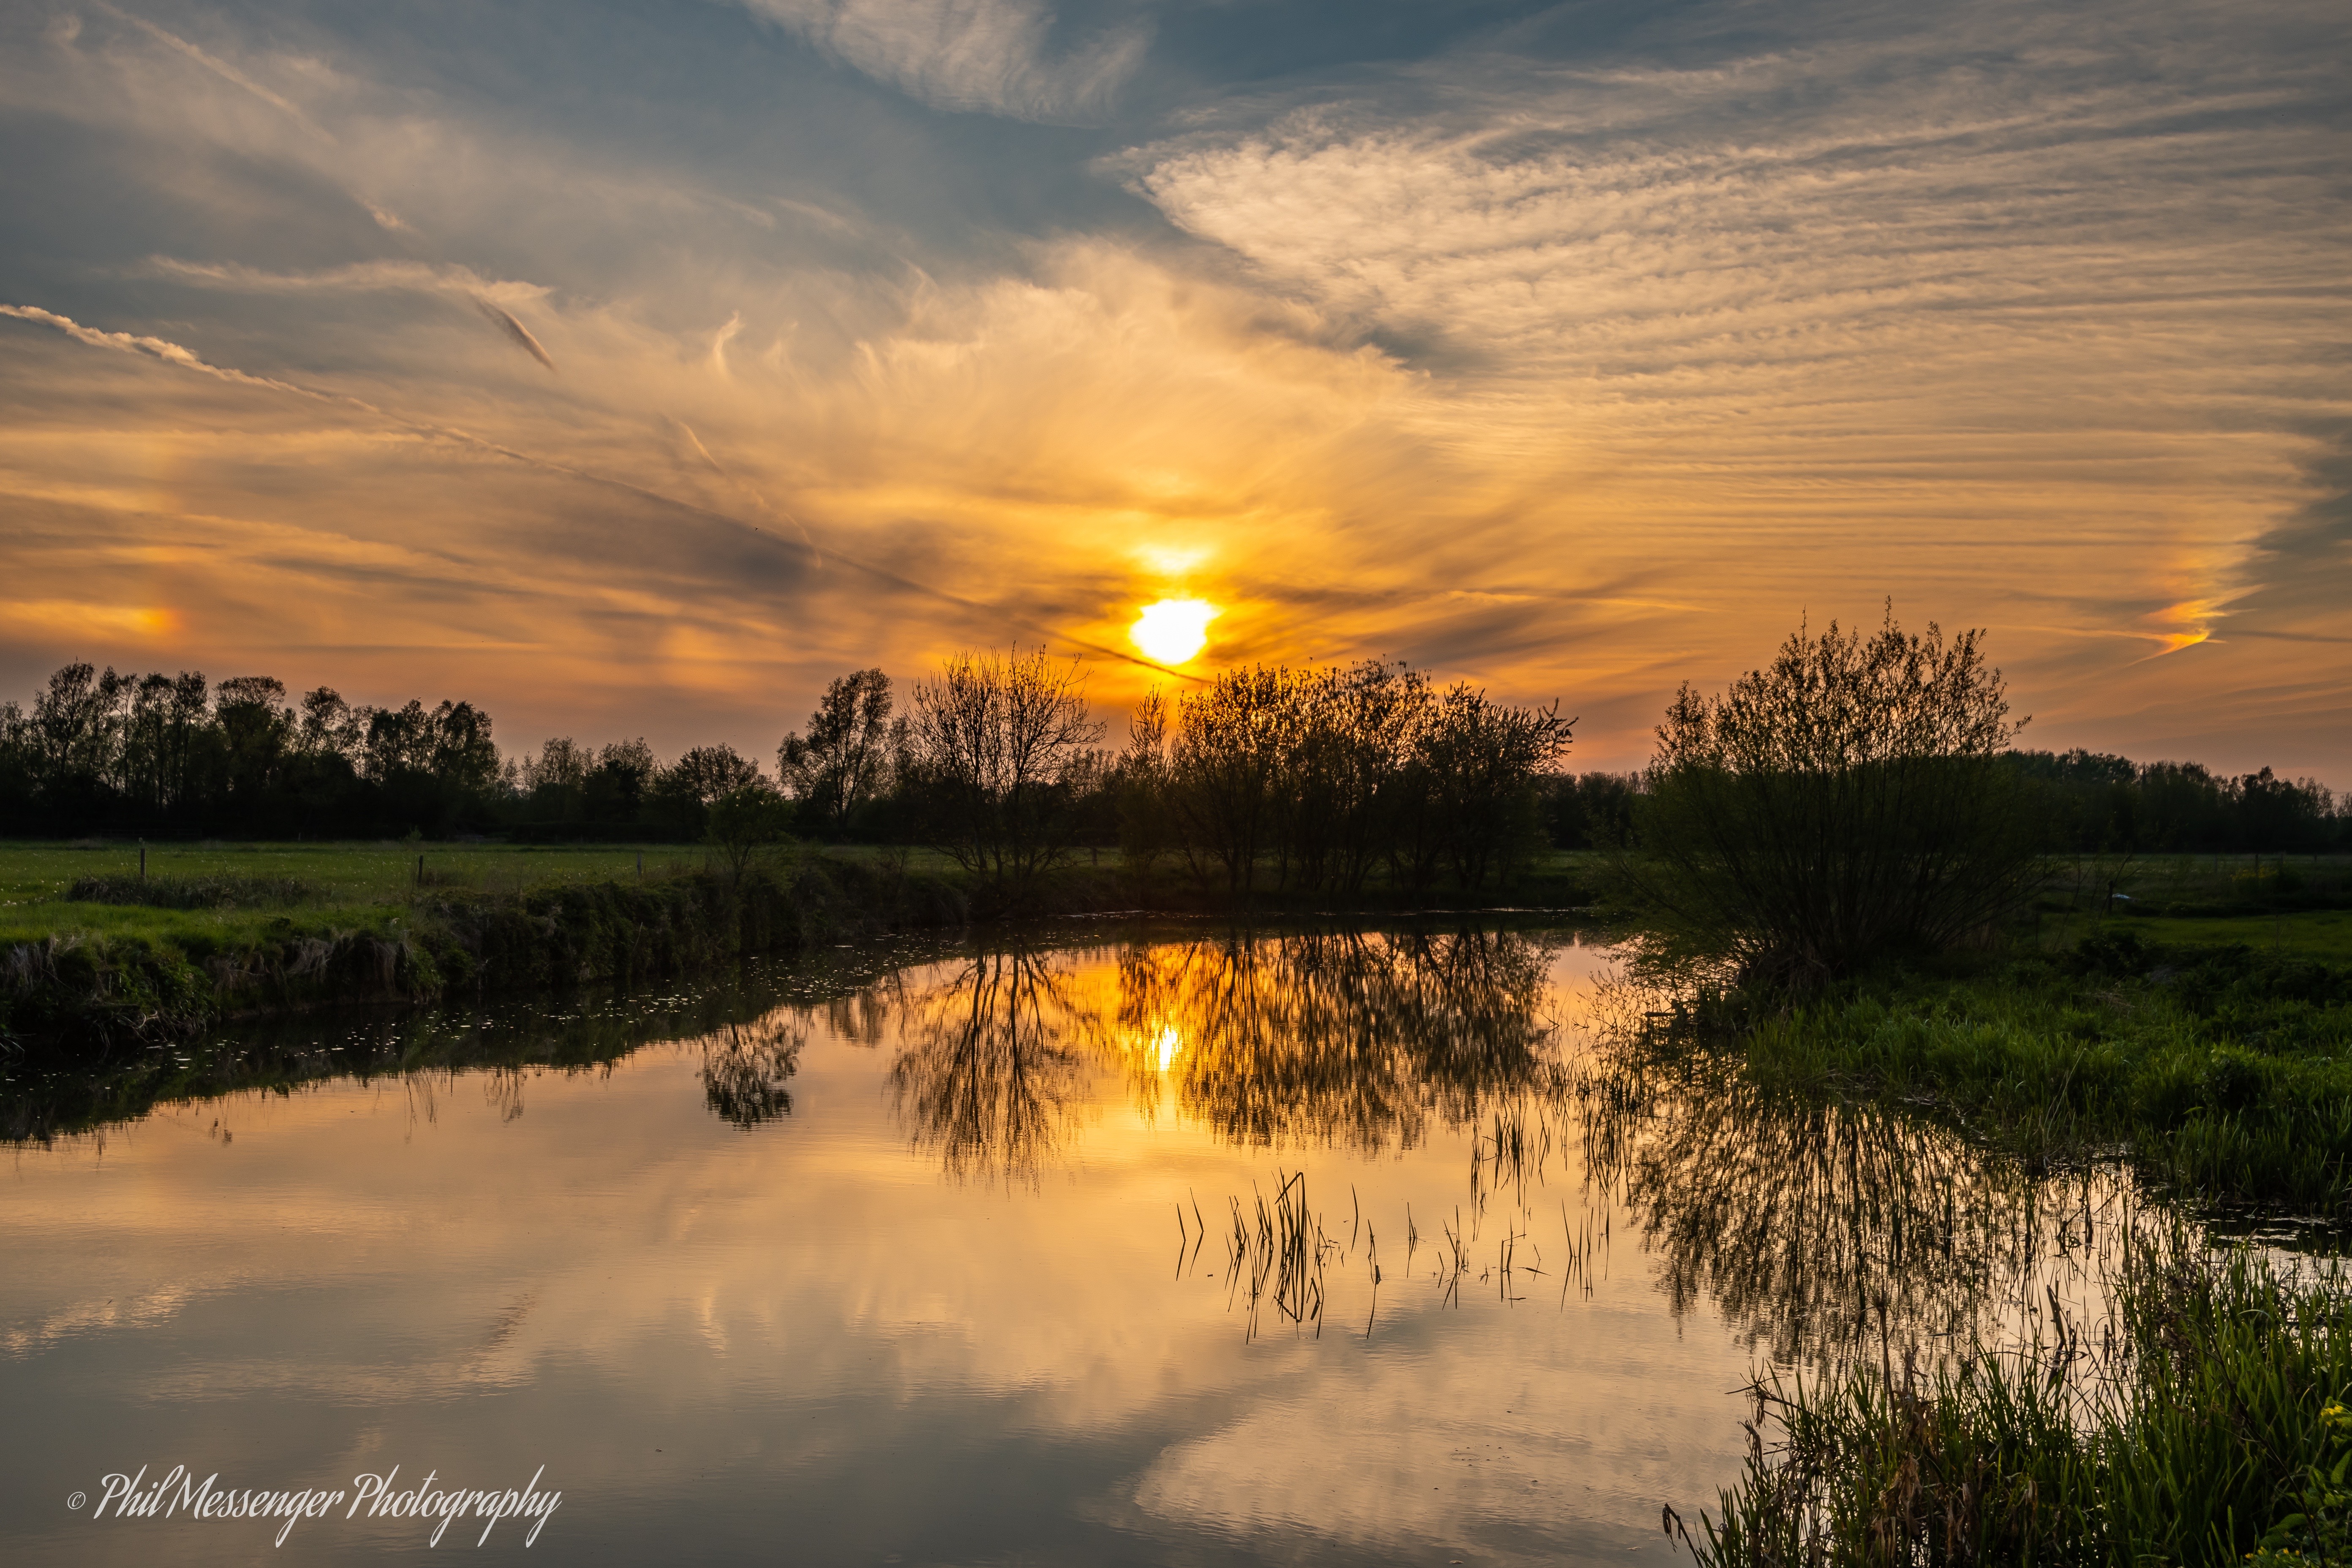 Sunset over the River Thames at Lechlade Gloucestershire with sun dogs.